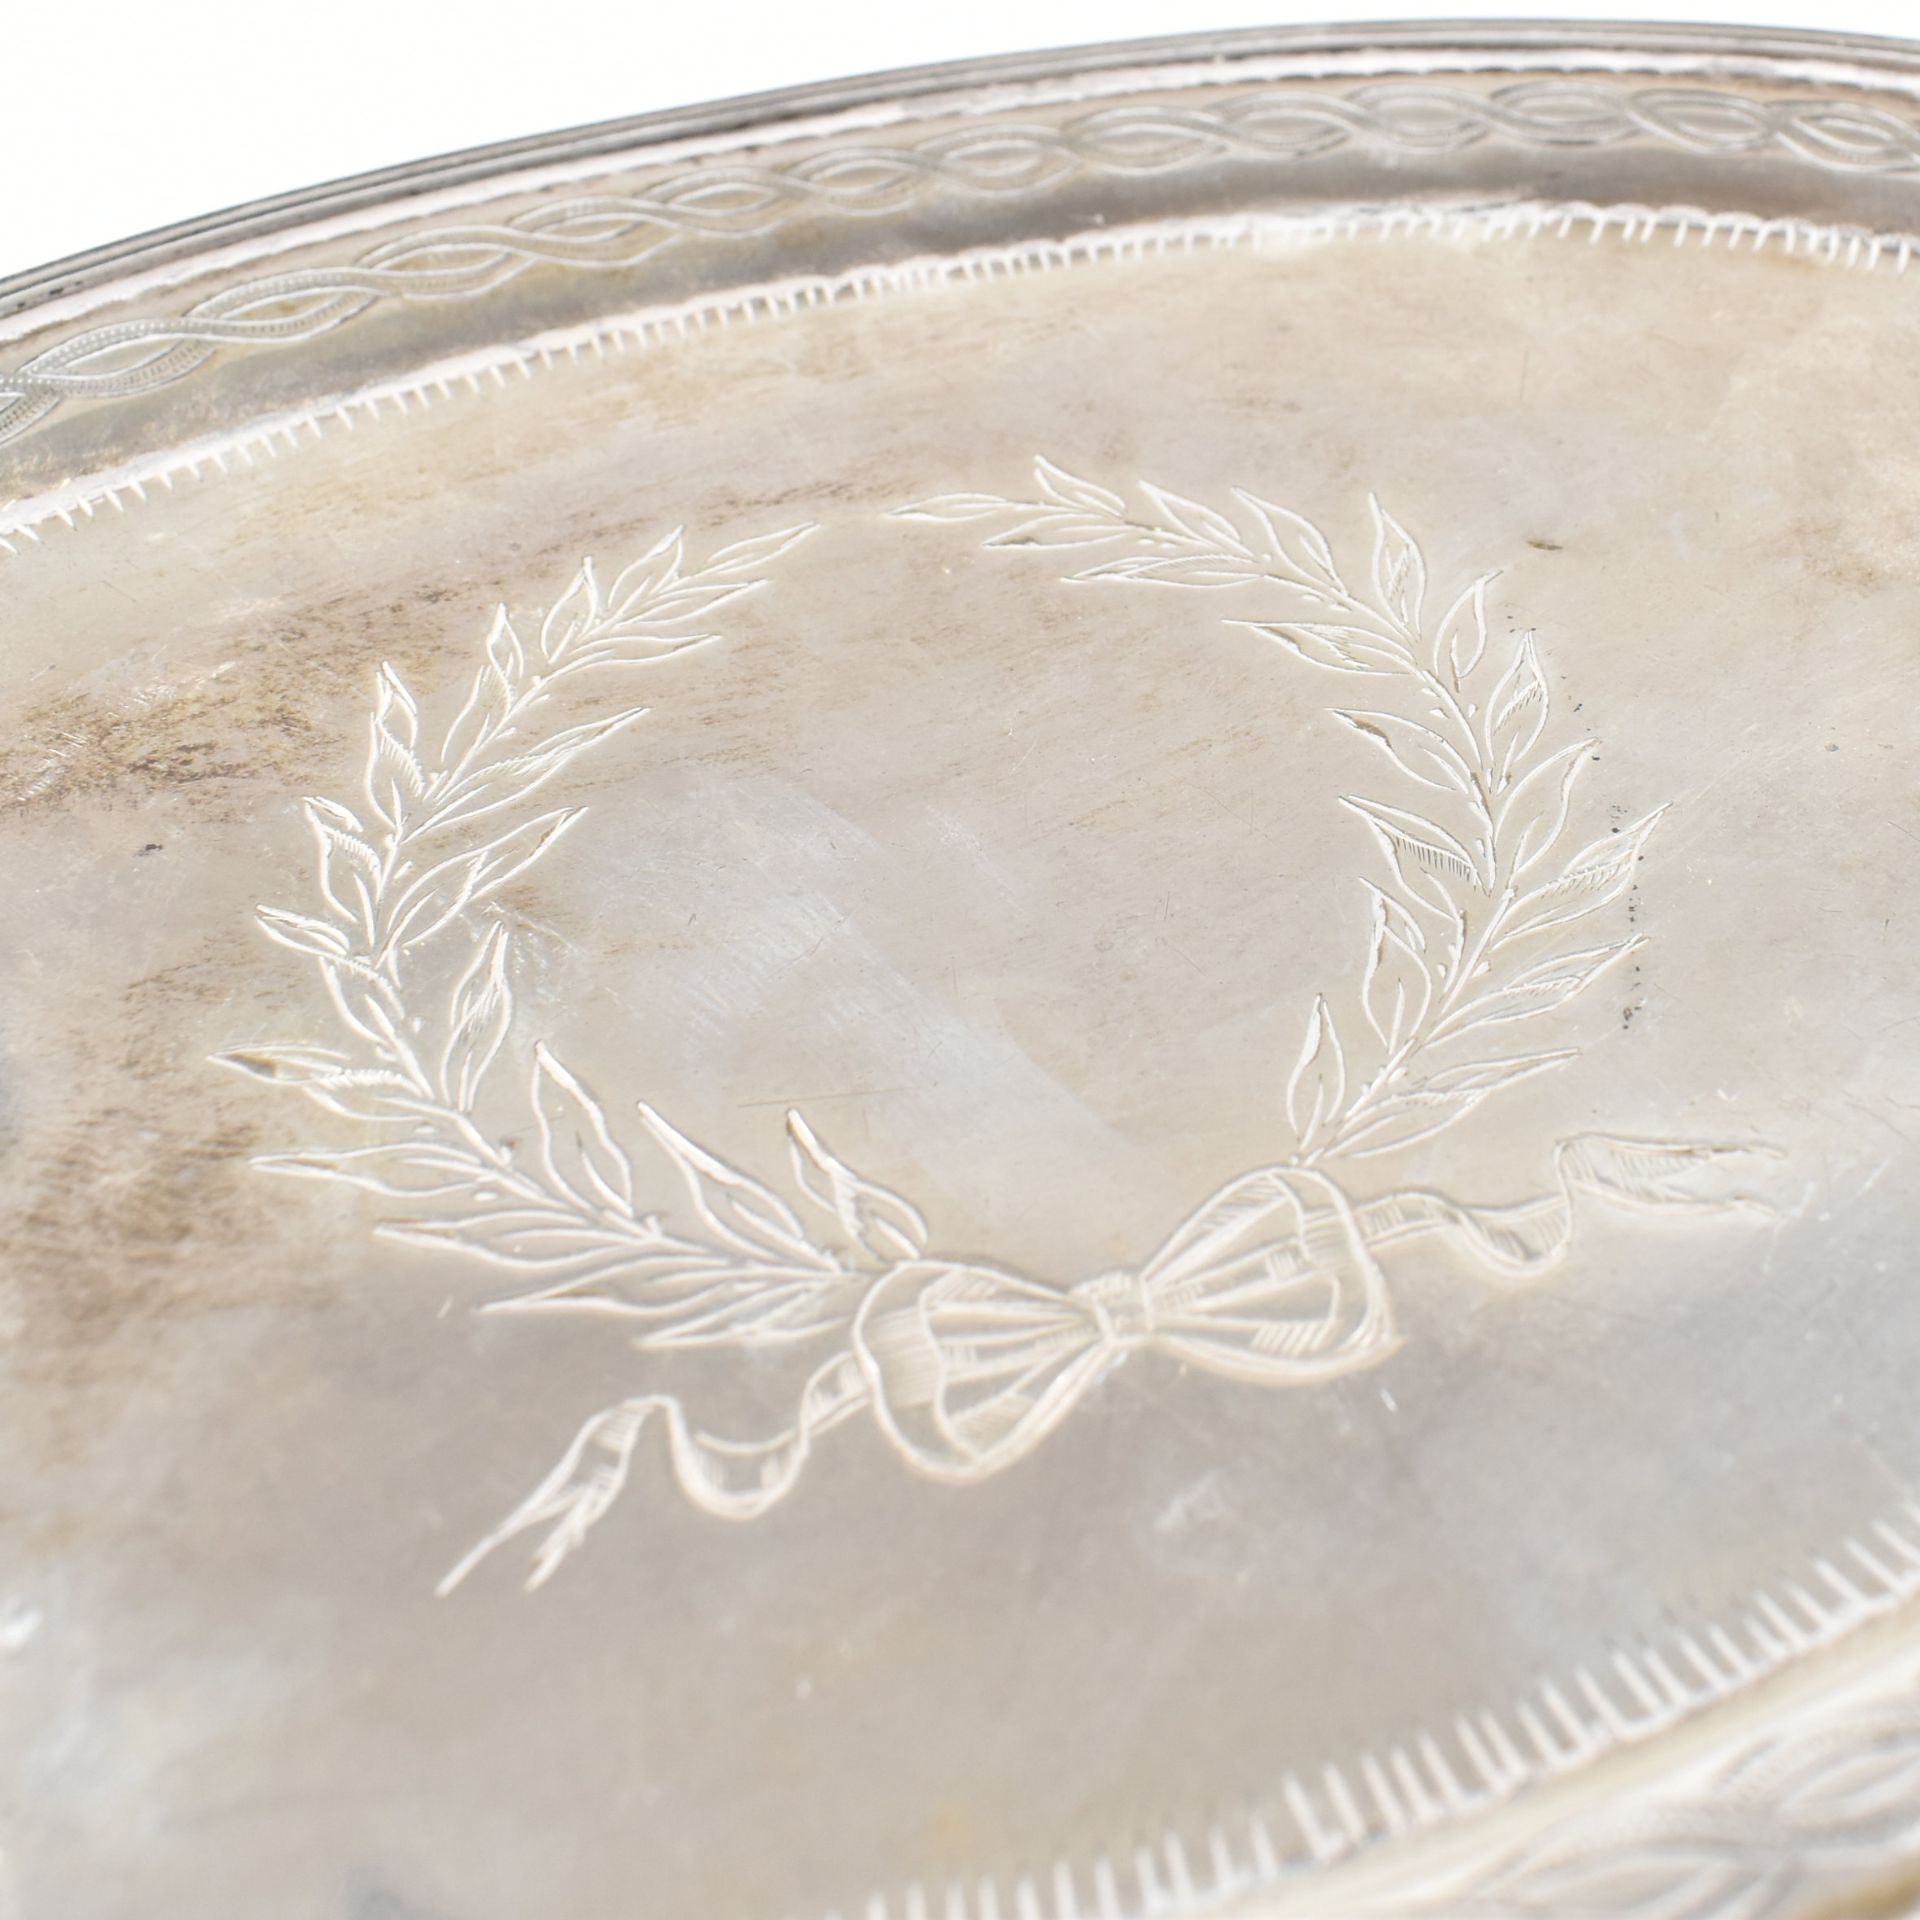 GEORGE V HALLMARKED SILVER TRAY - Image 8 of 8